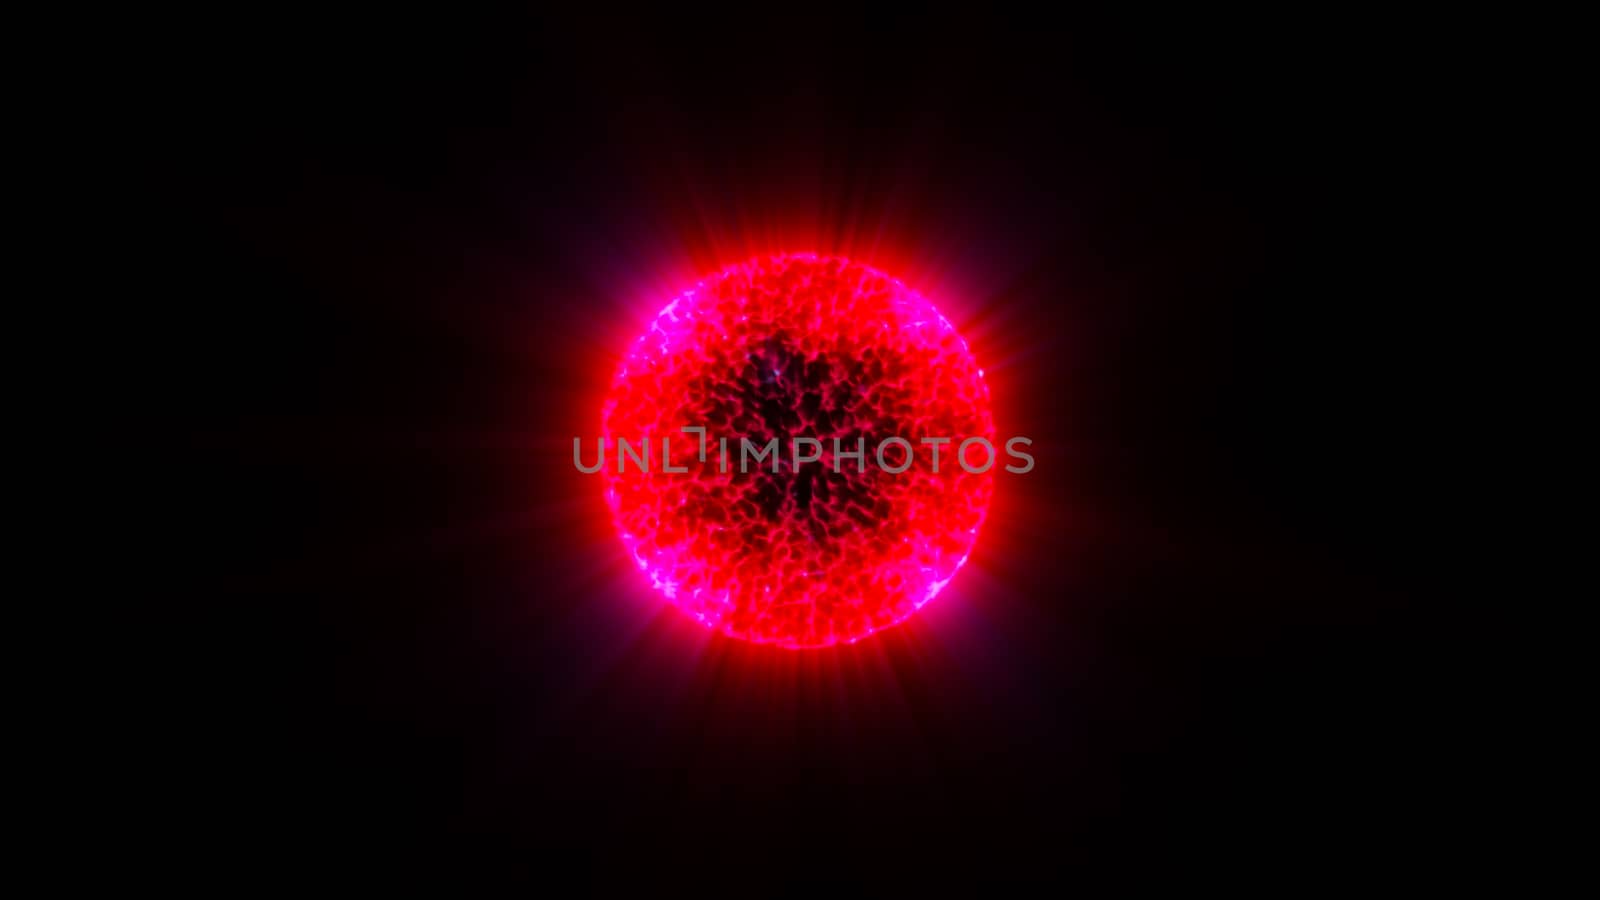 Abstract glow sphere. Digital illustration by nolimit046